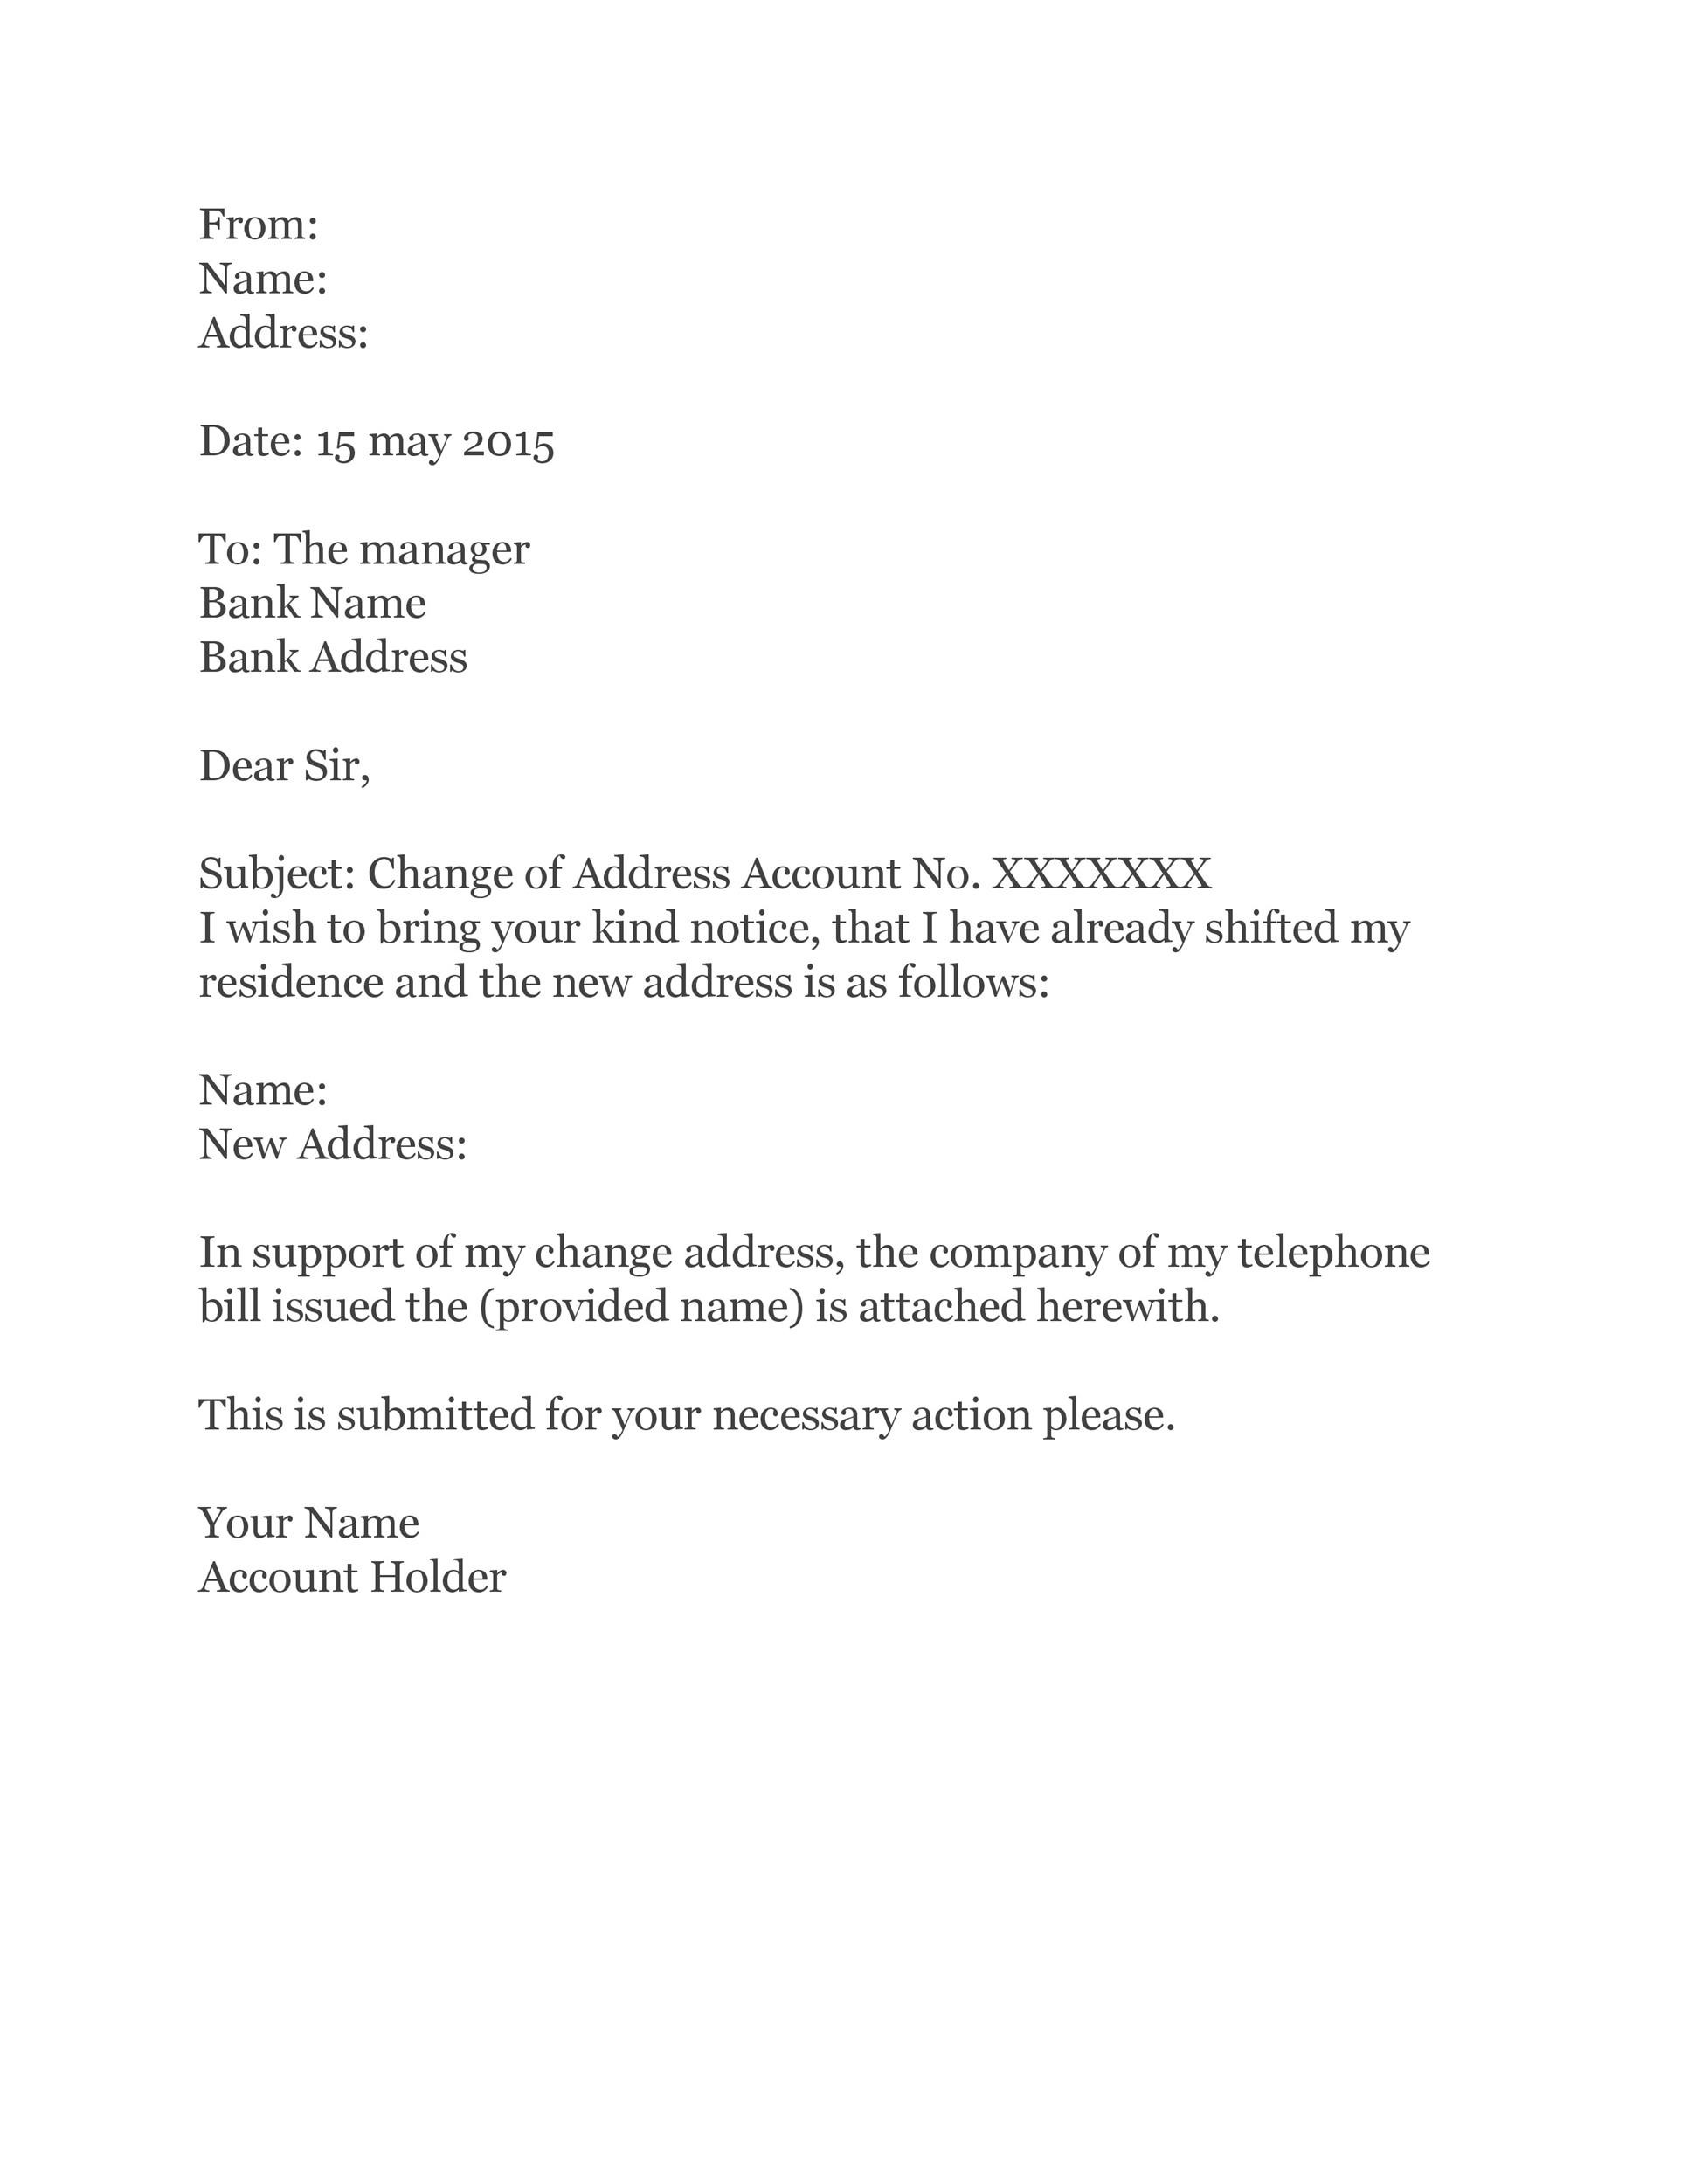 application letter for address change in gas agency